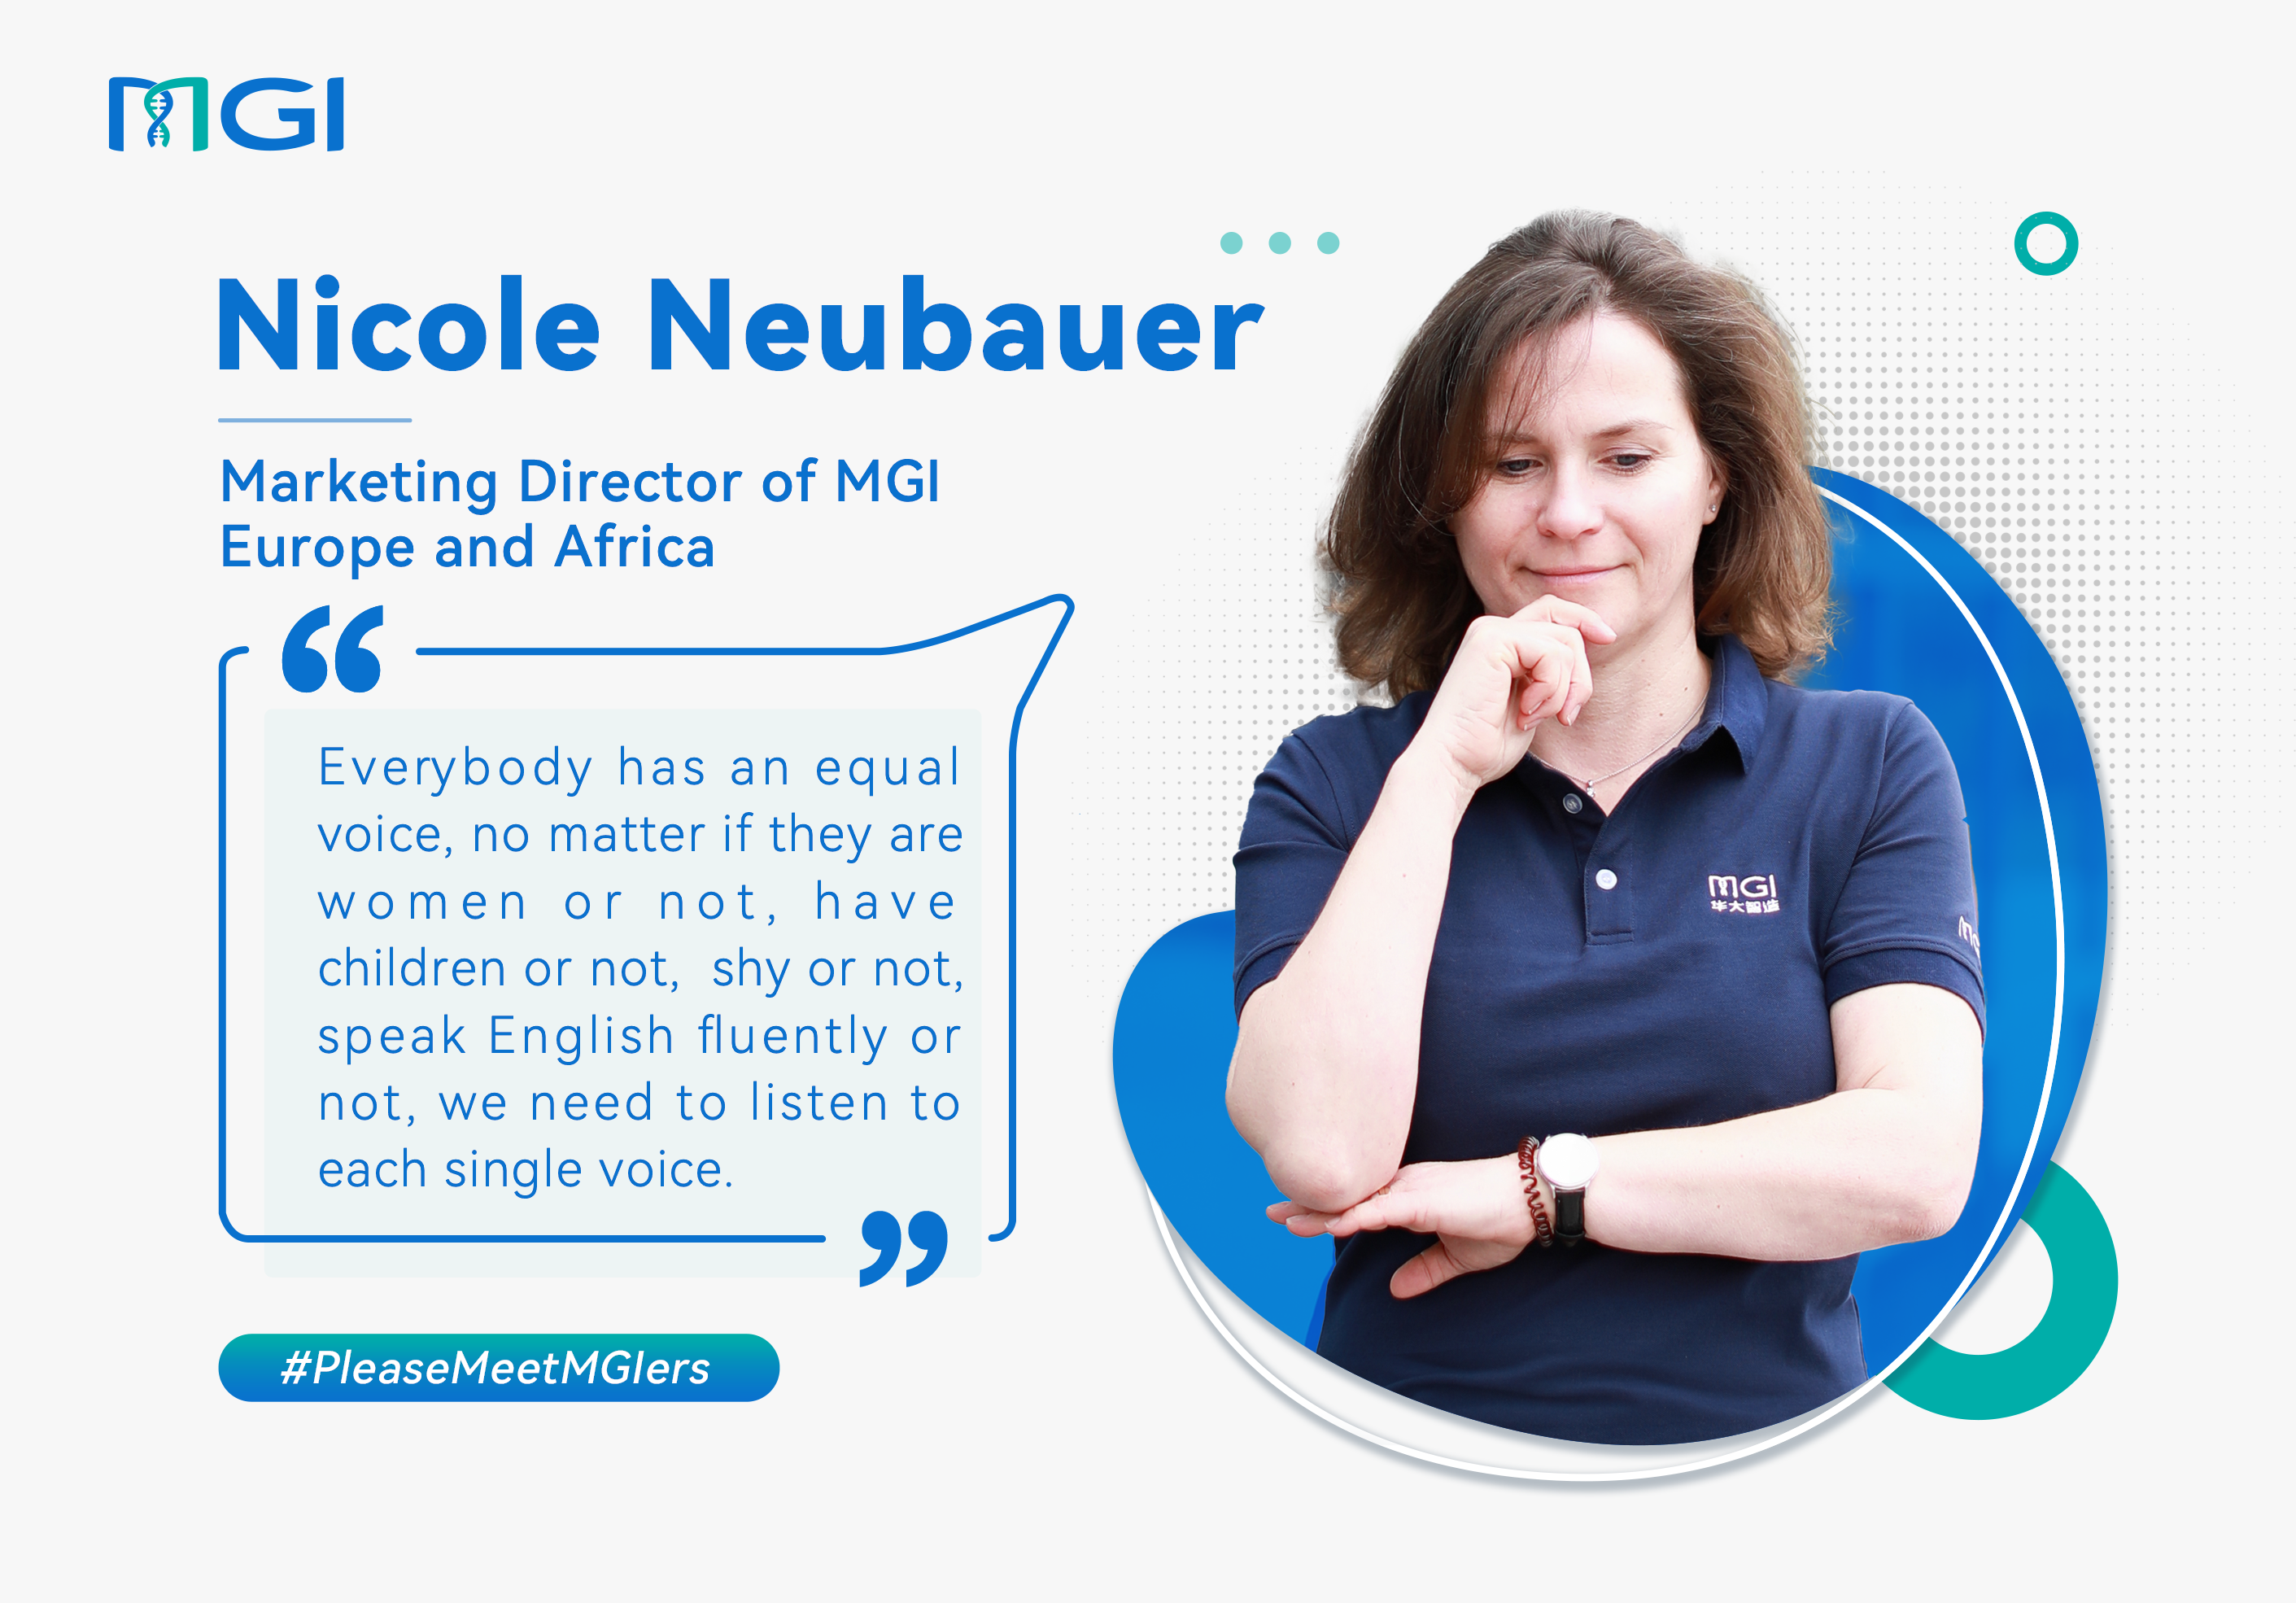 Interview with Nicole Neubauer: Everybody has an equal voice, no matter they are women or not, have children or not